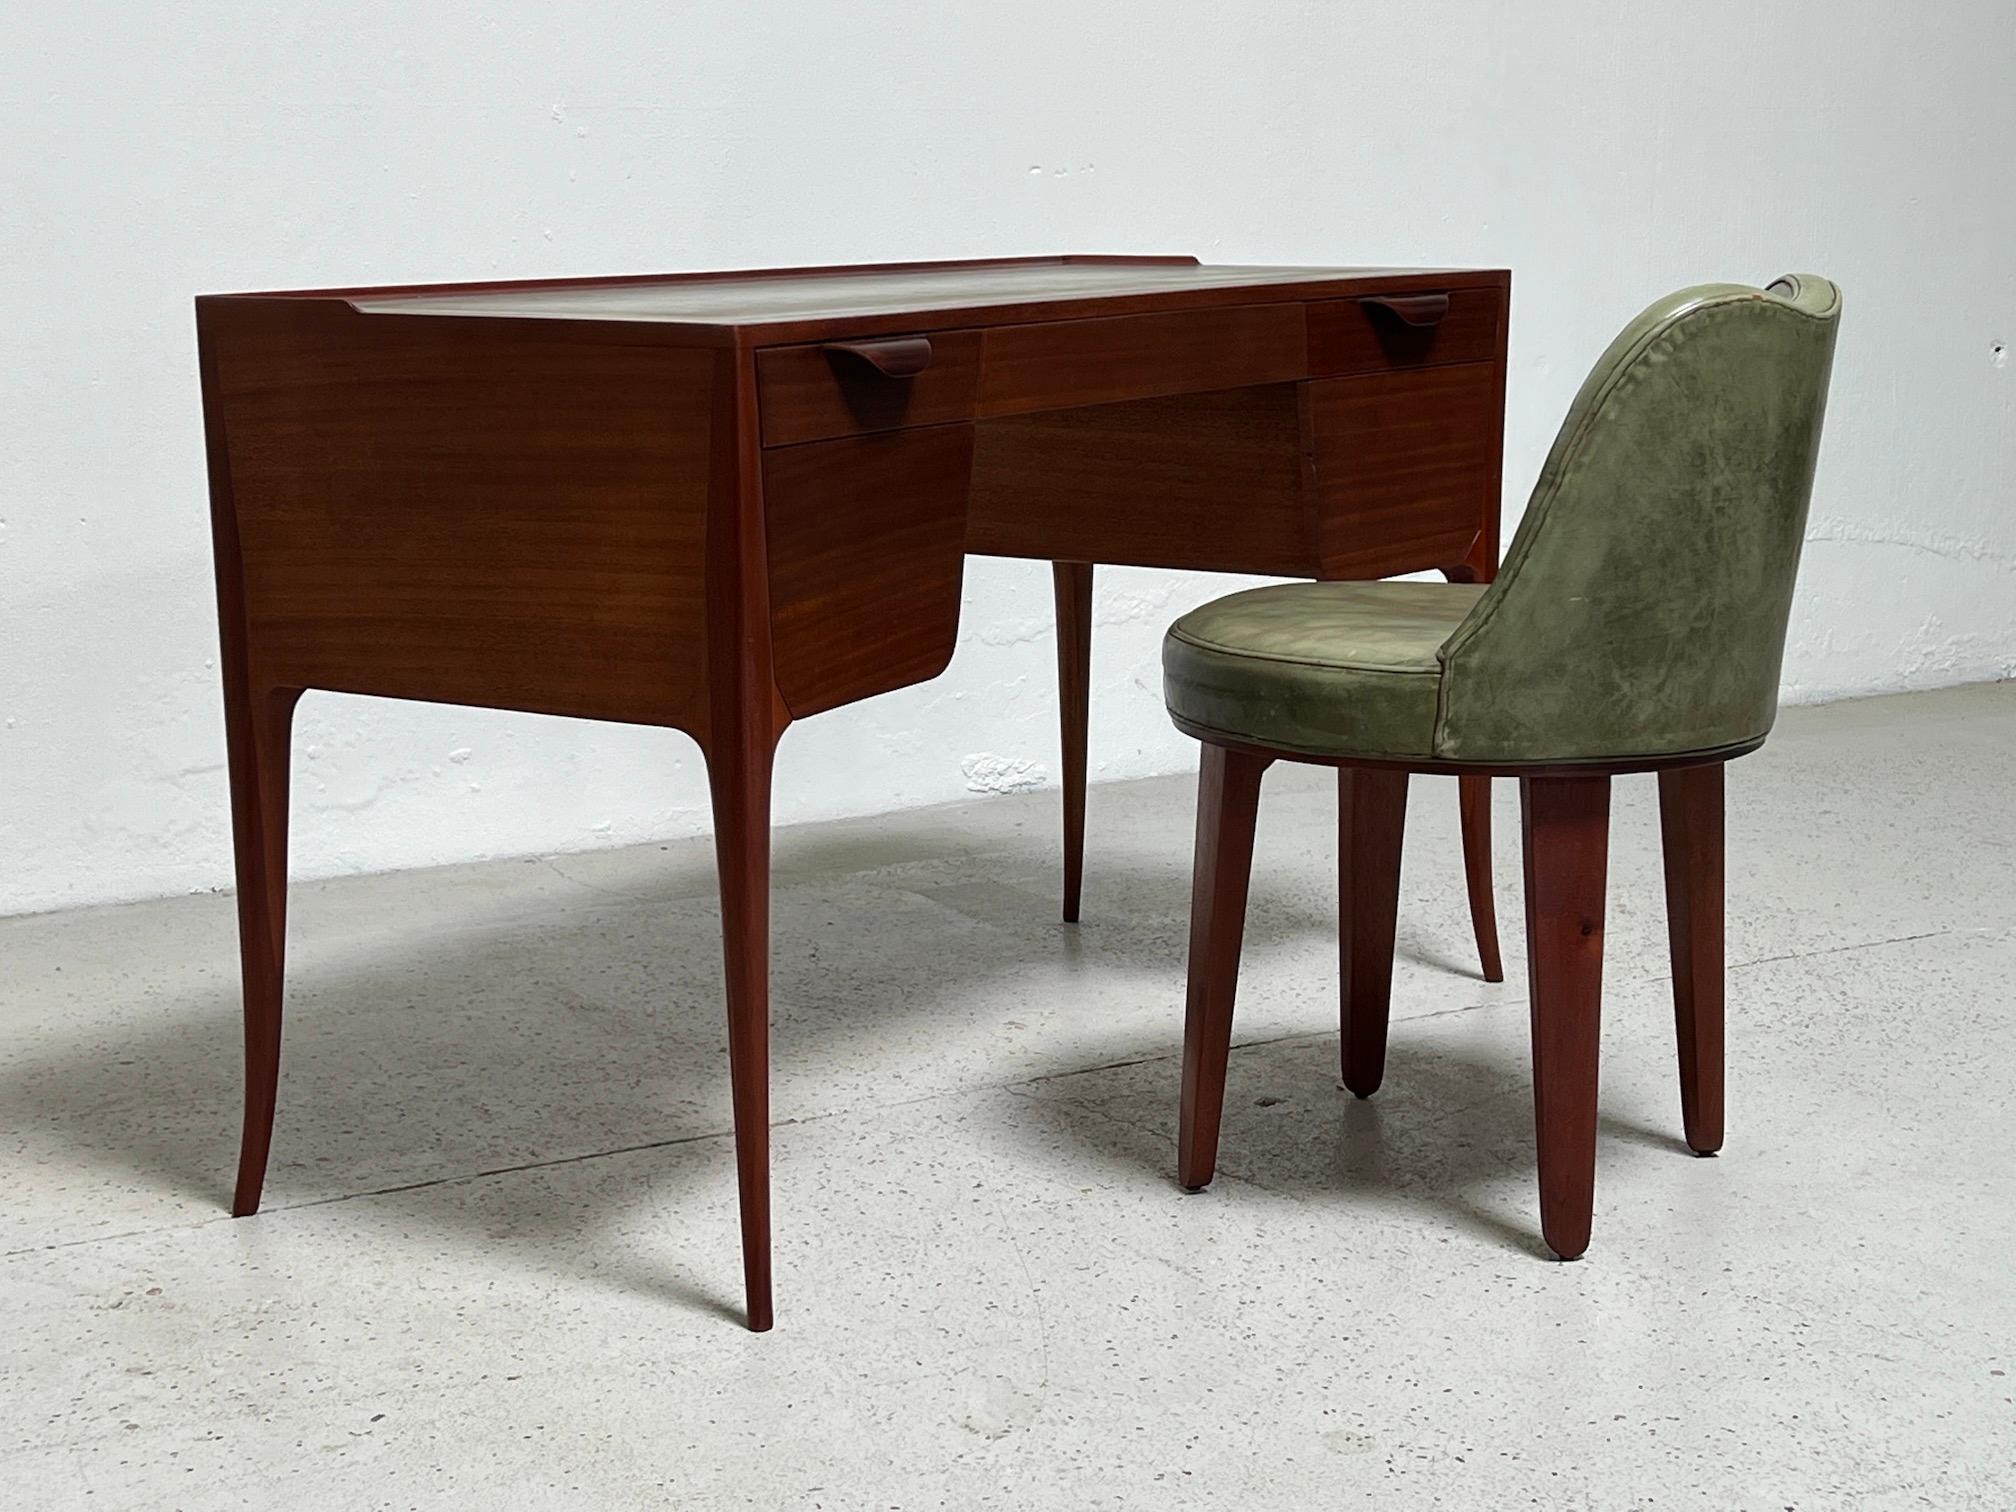 An elegant and early design by Edward Wormley for Dunbar. Desk model 4725 in mahogany with original green leather and matching swiveling stool.